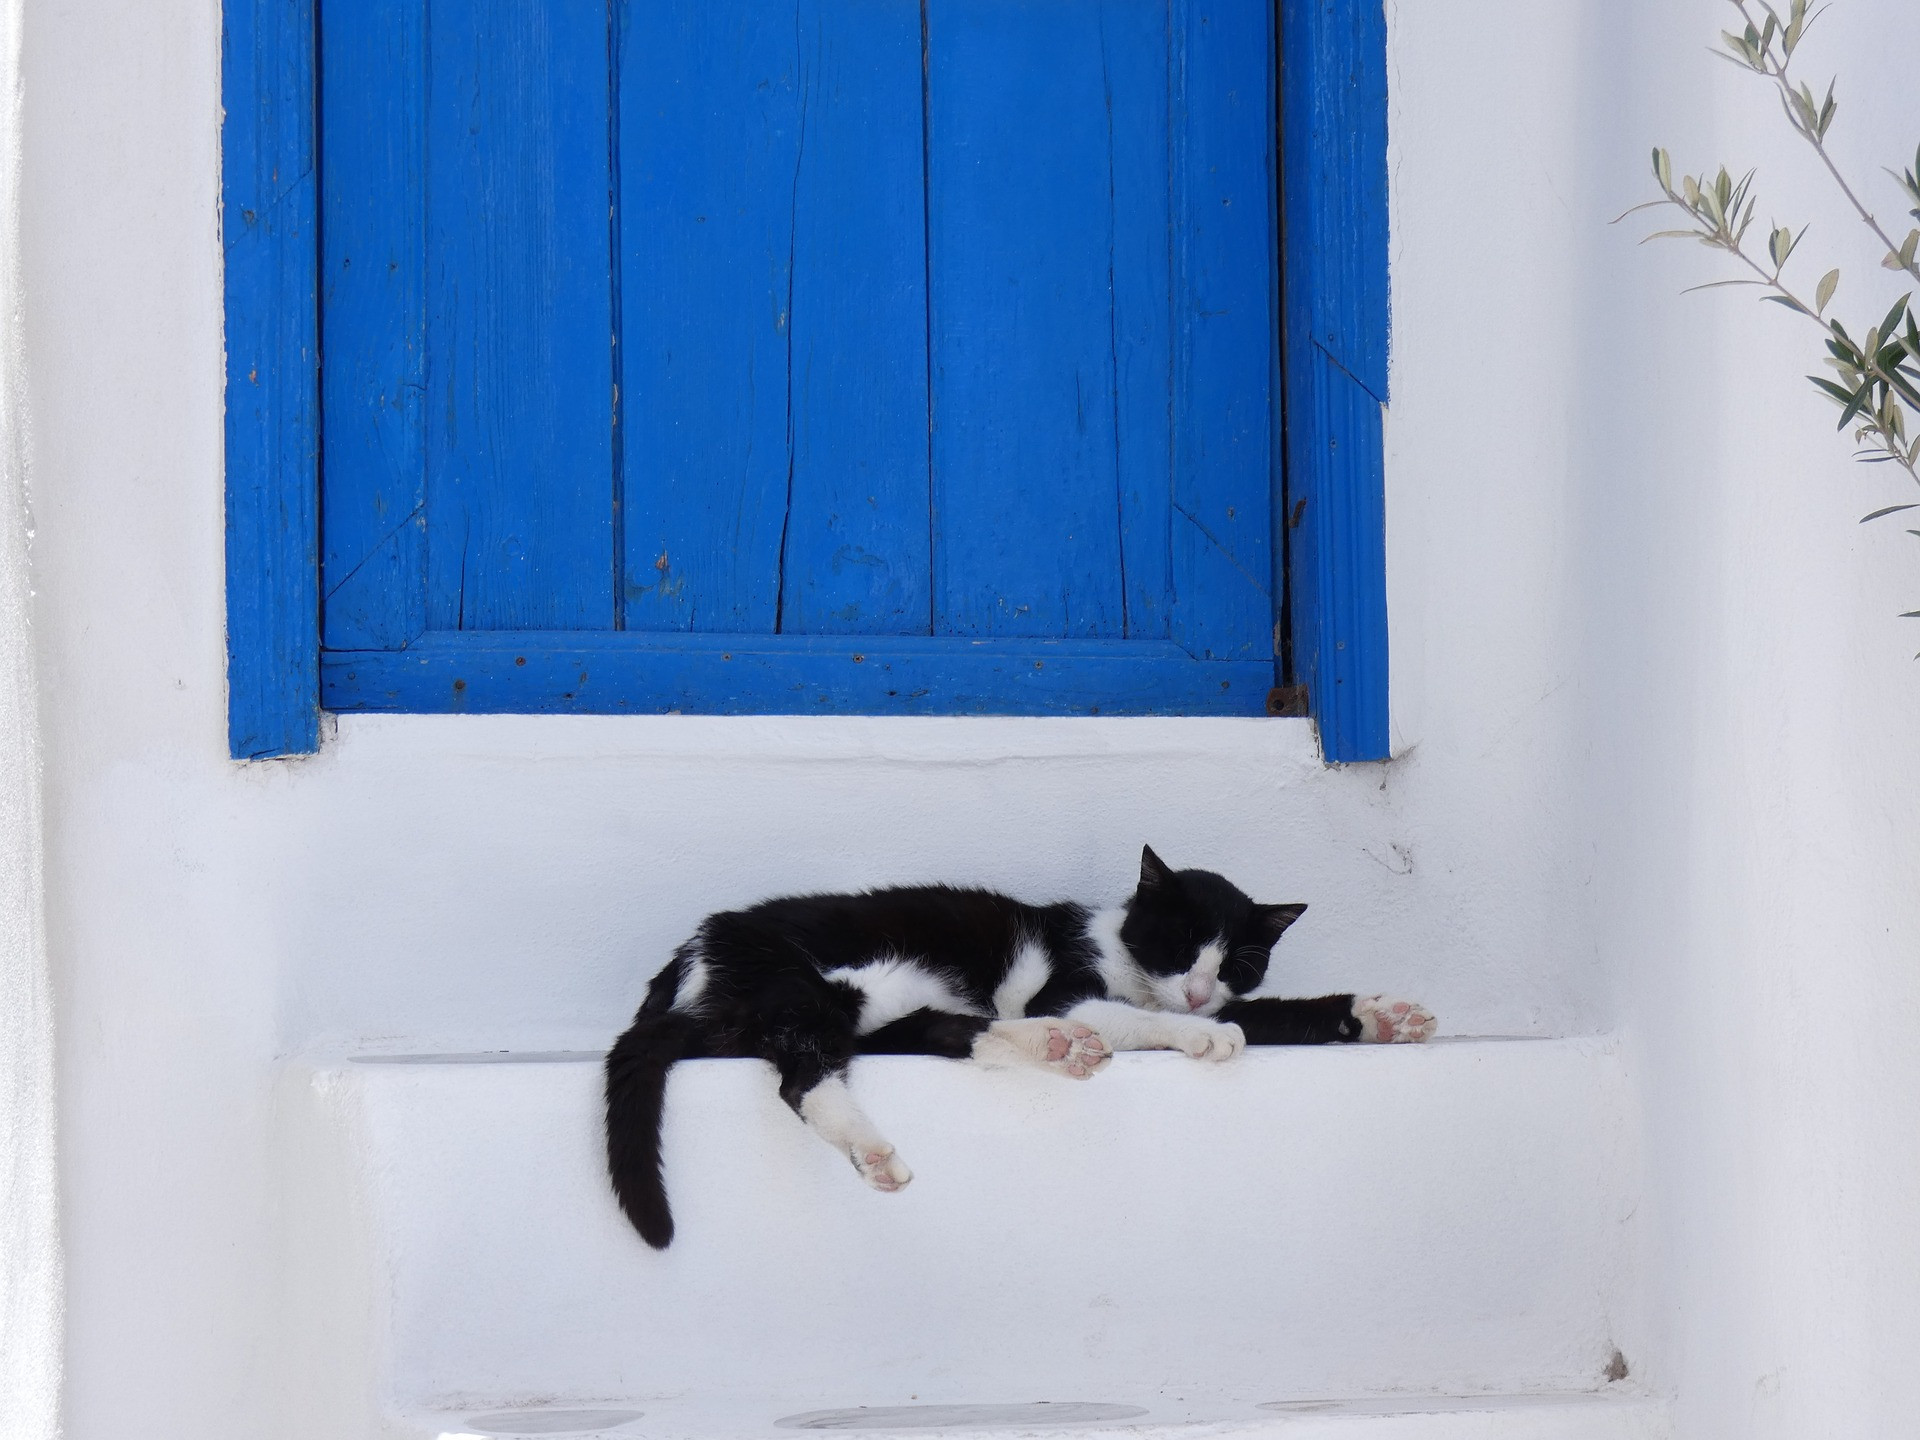 Cats of Greece